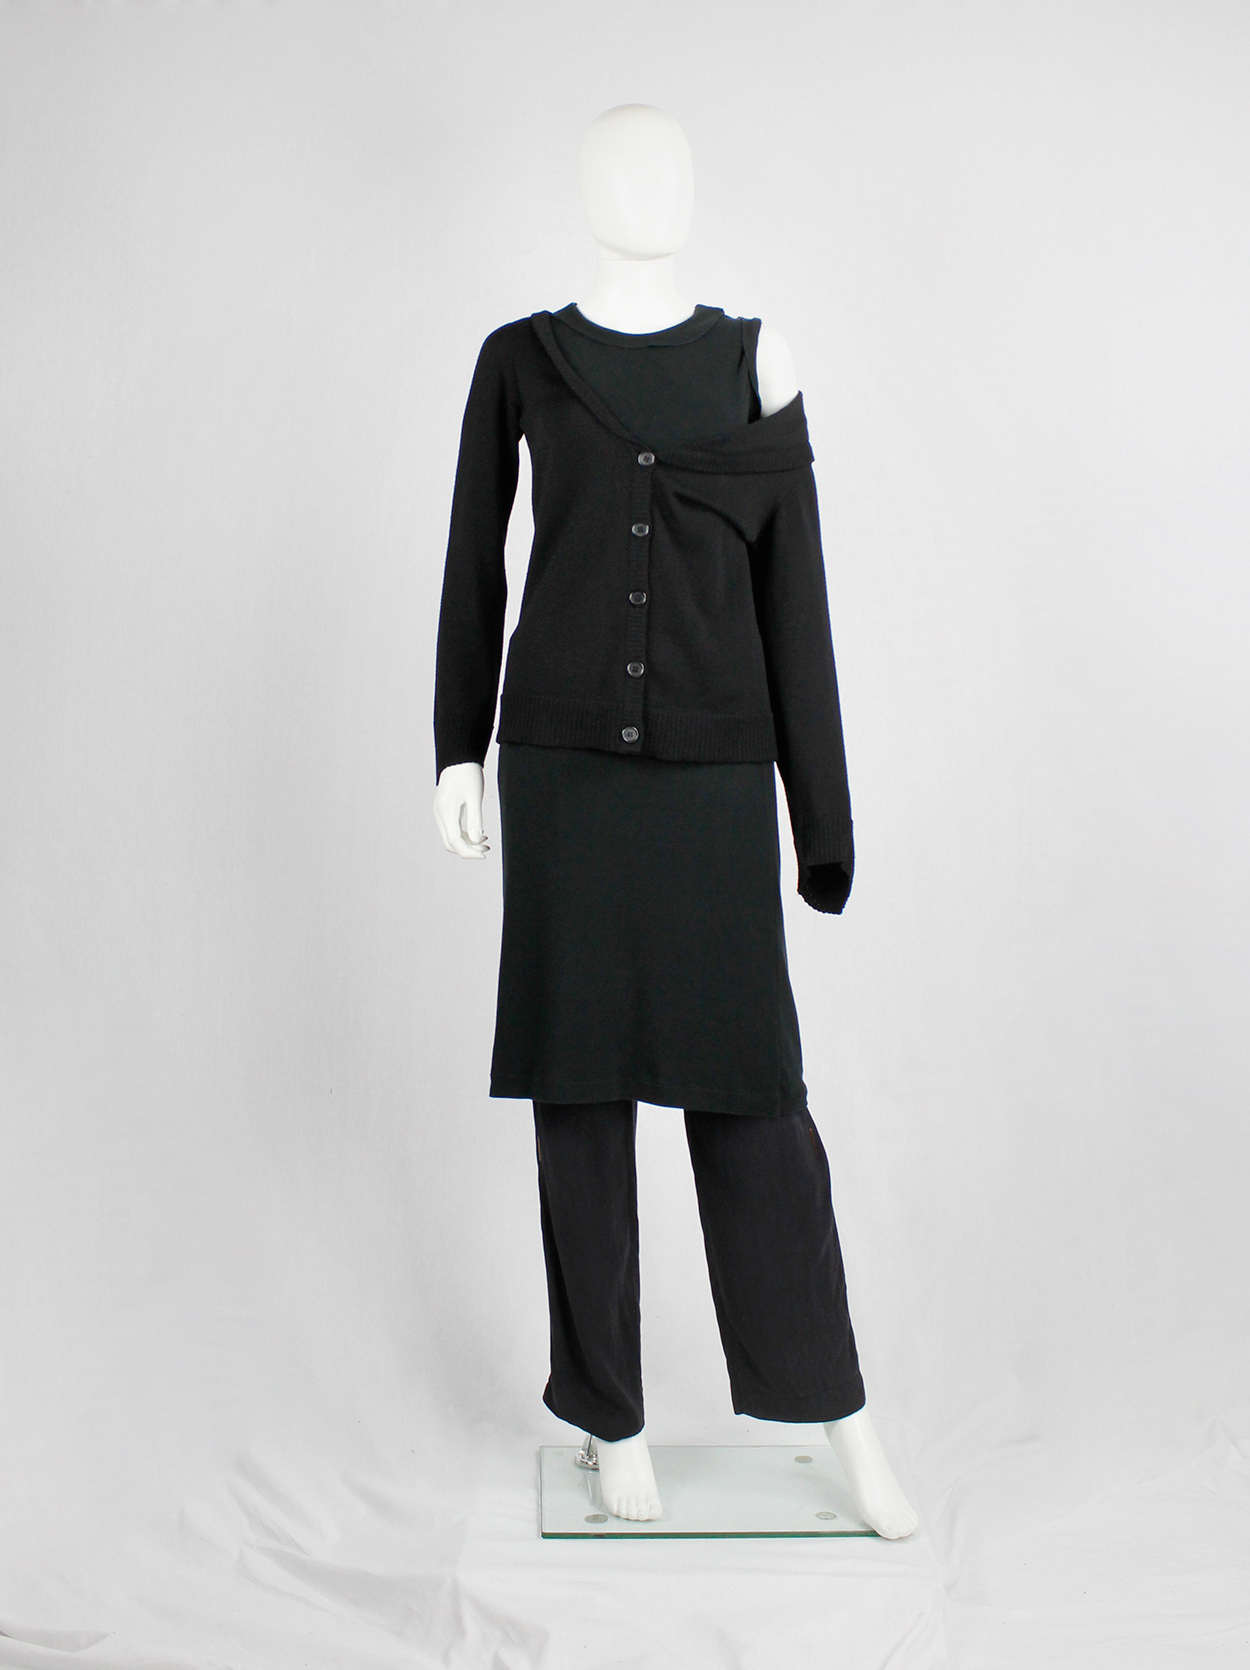 Maison Martin Margiela black stretched out cardigan falling off the ...